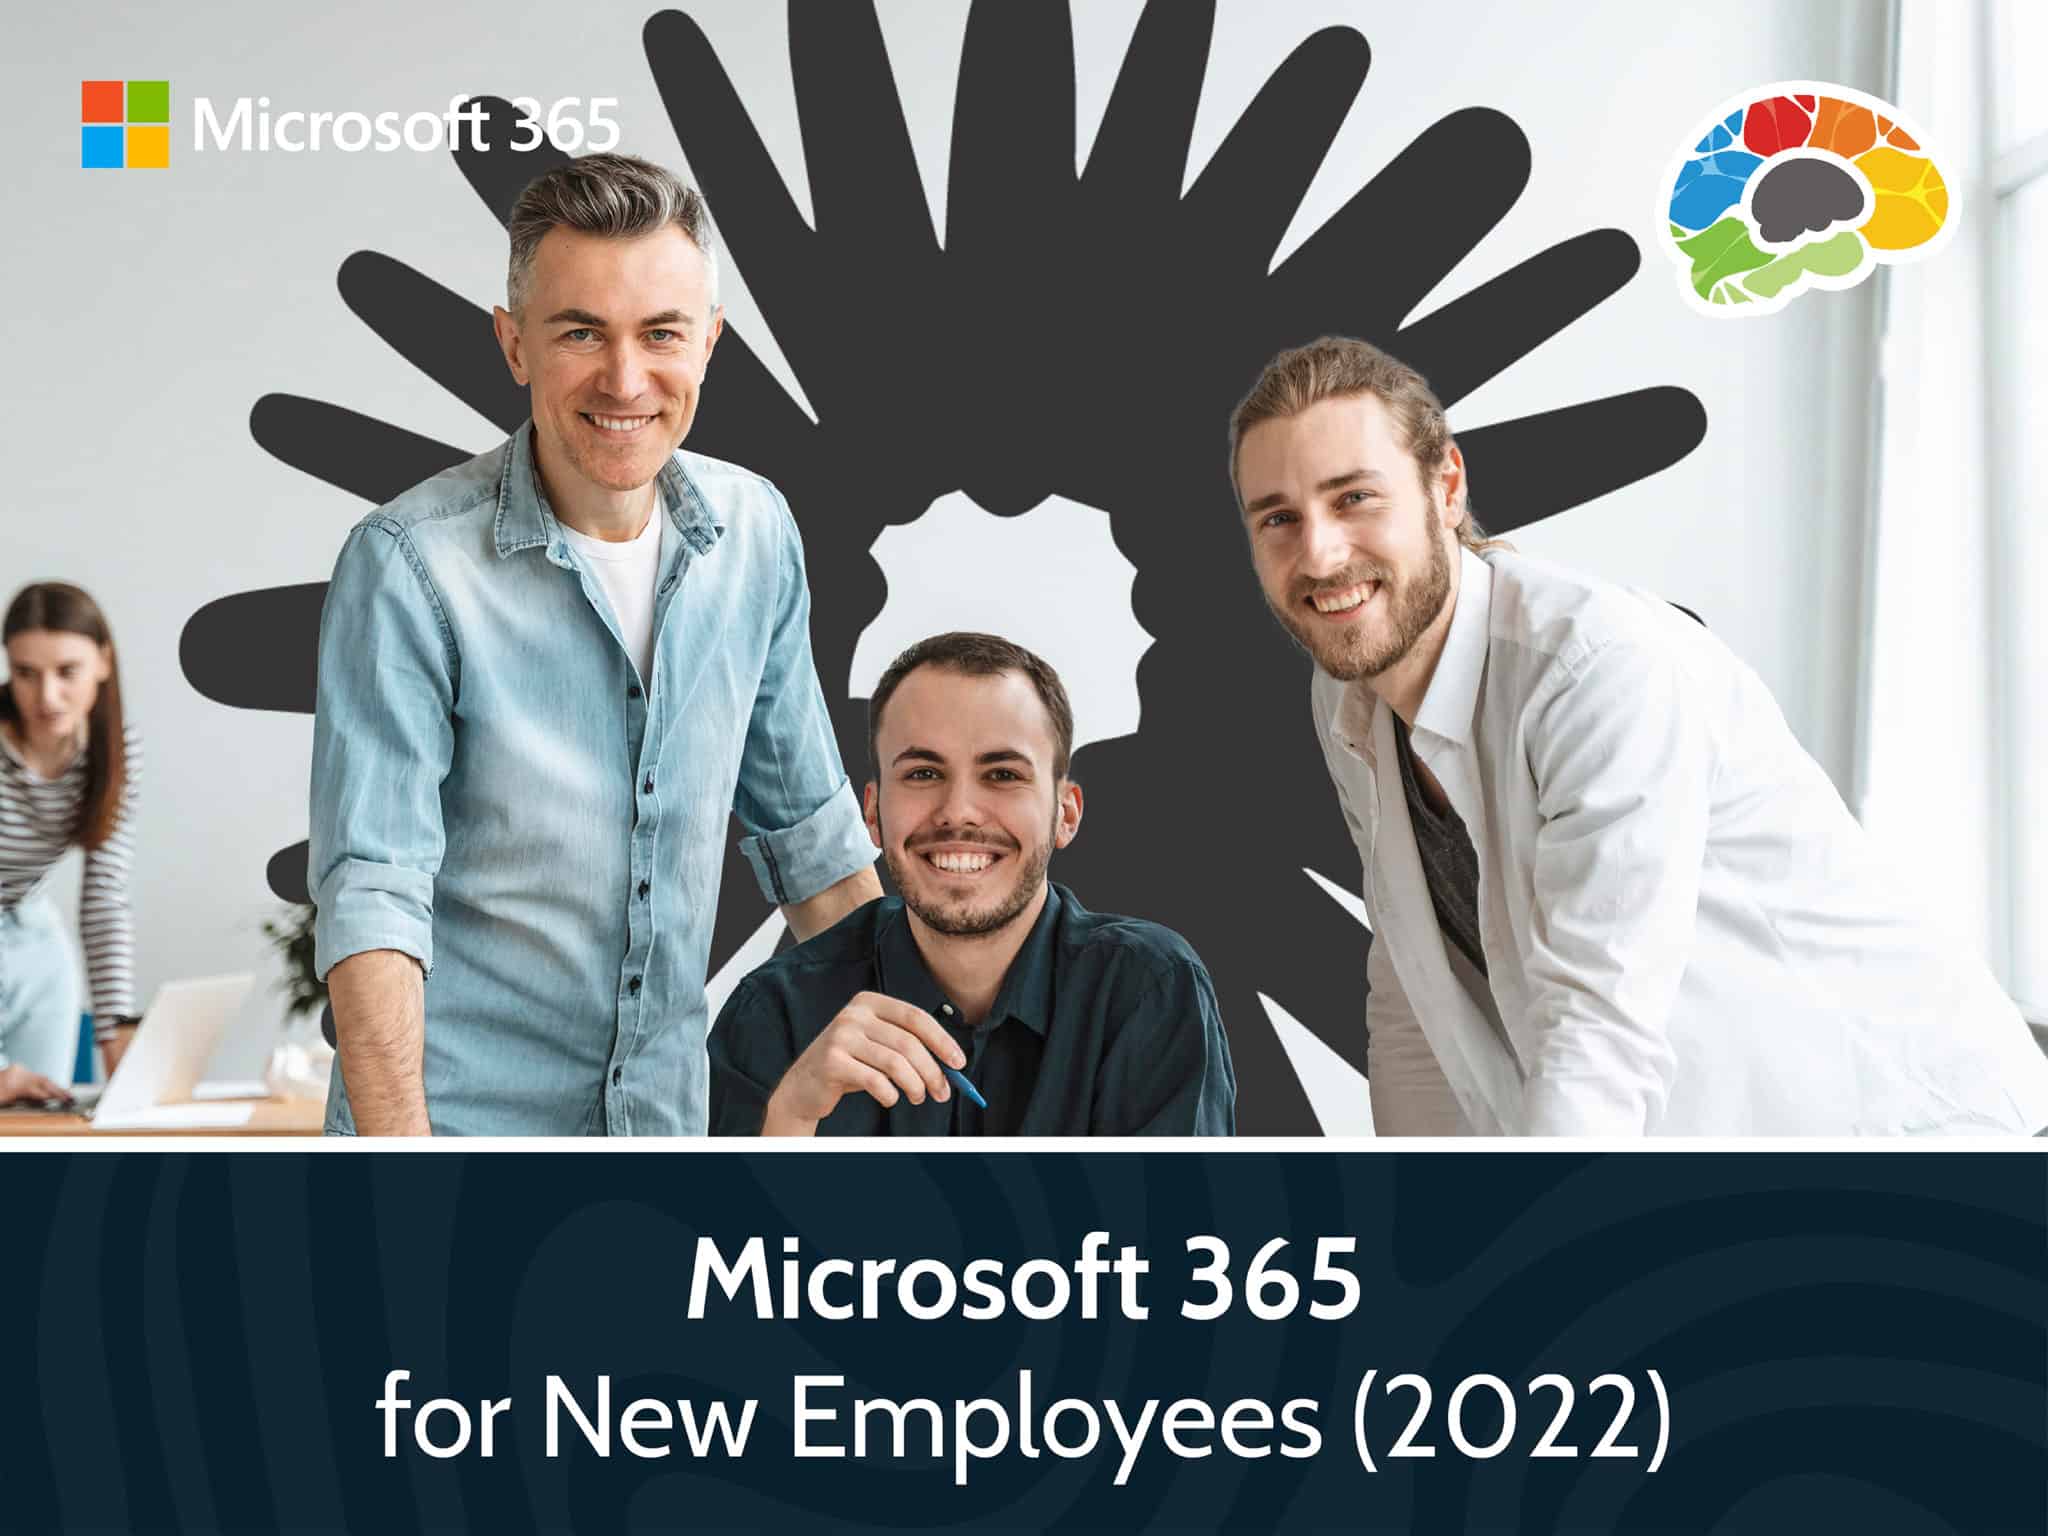 Microsoft 365 for New Employees 2022 scaled